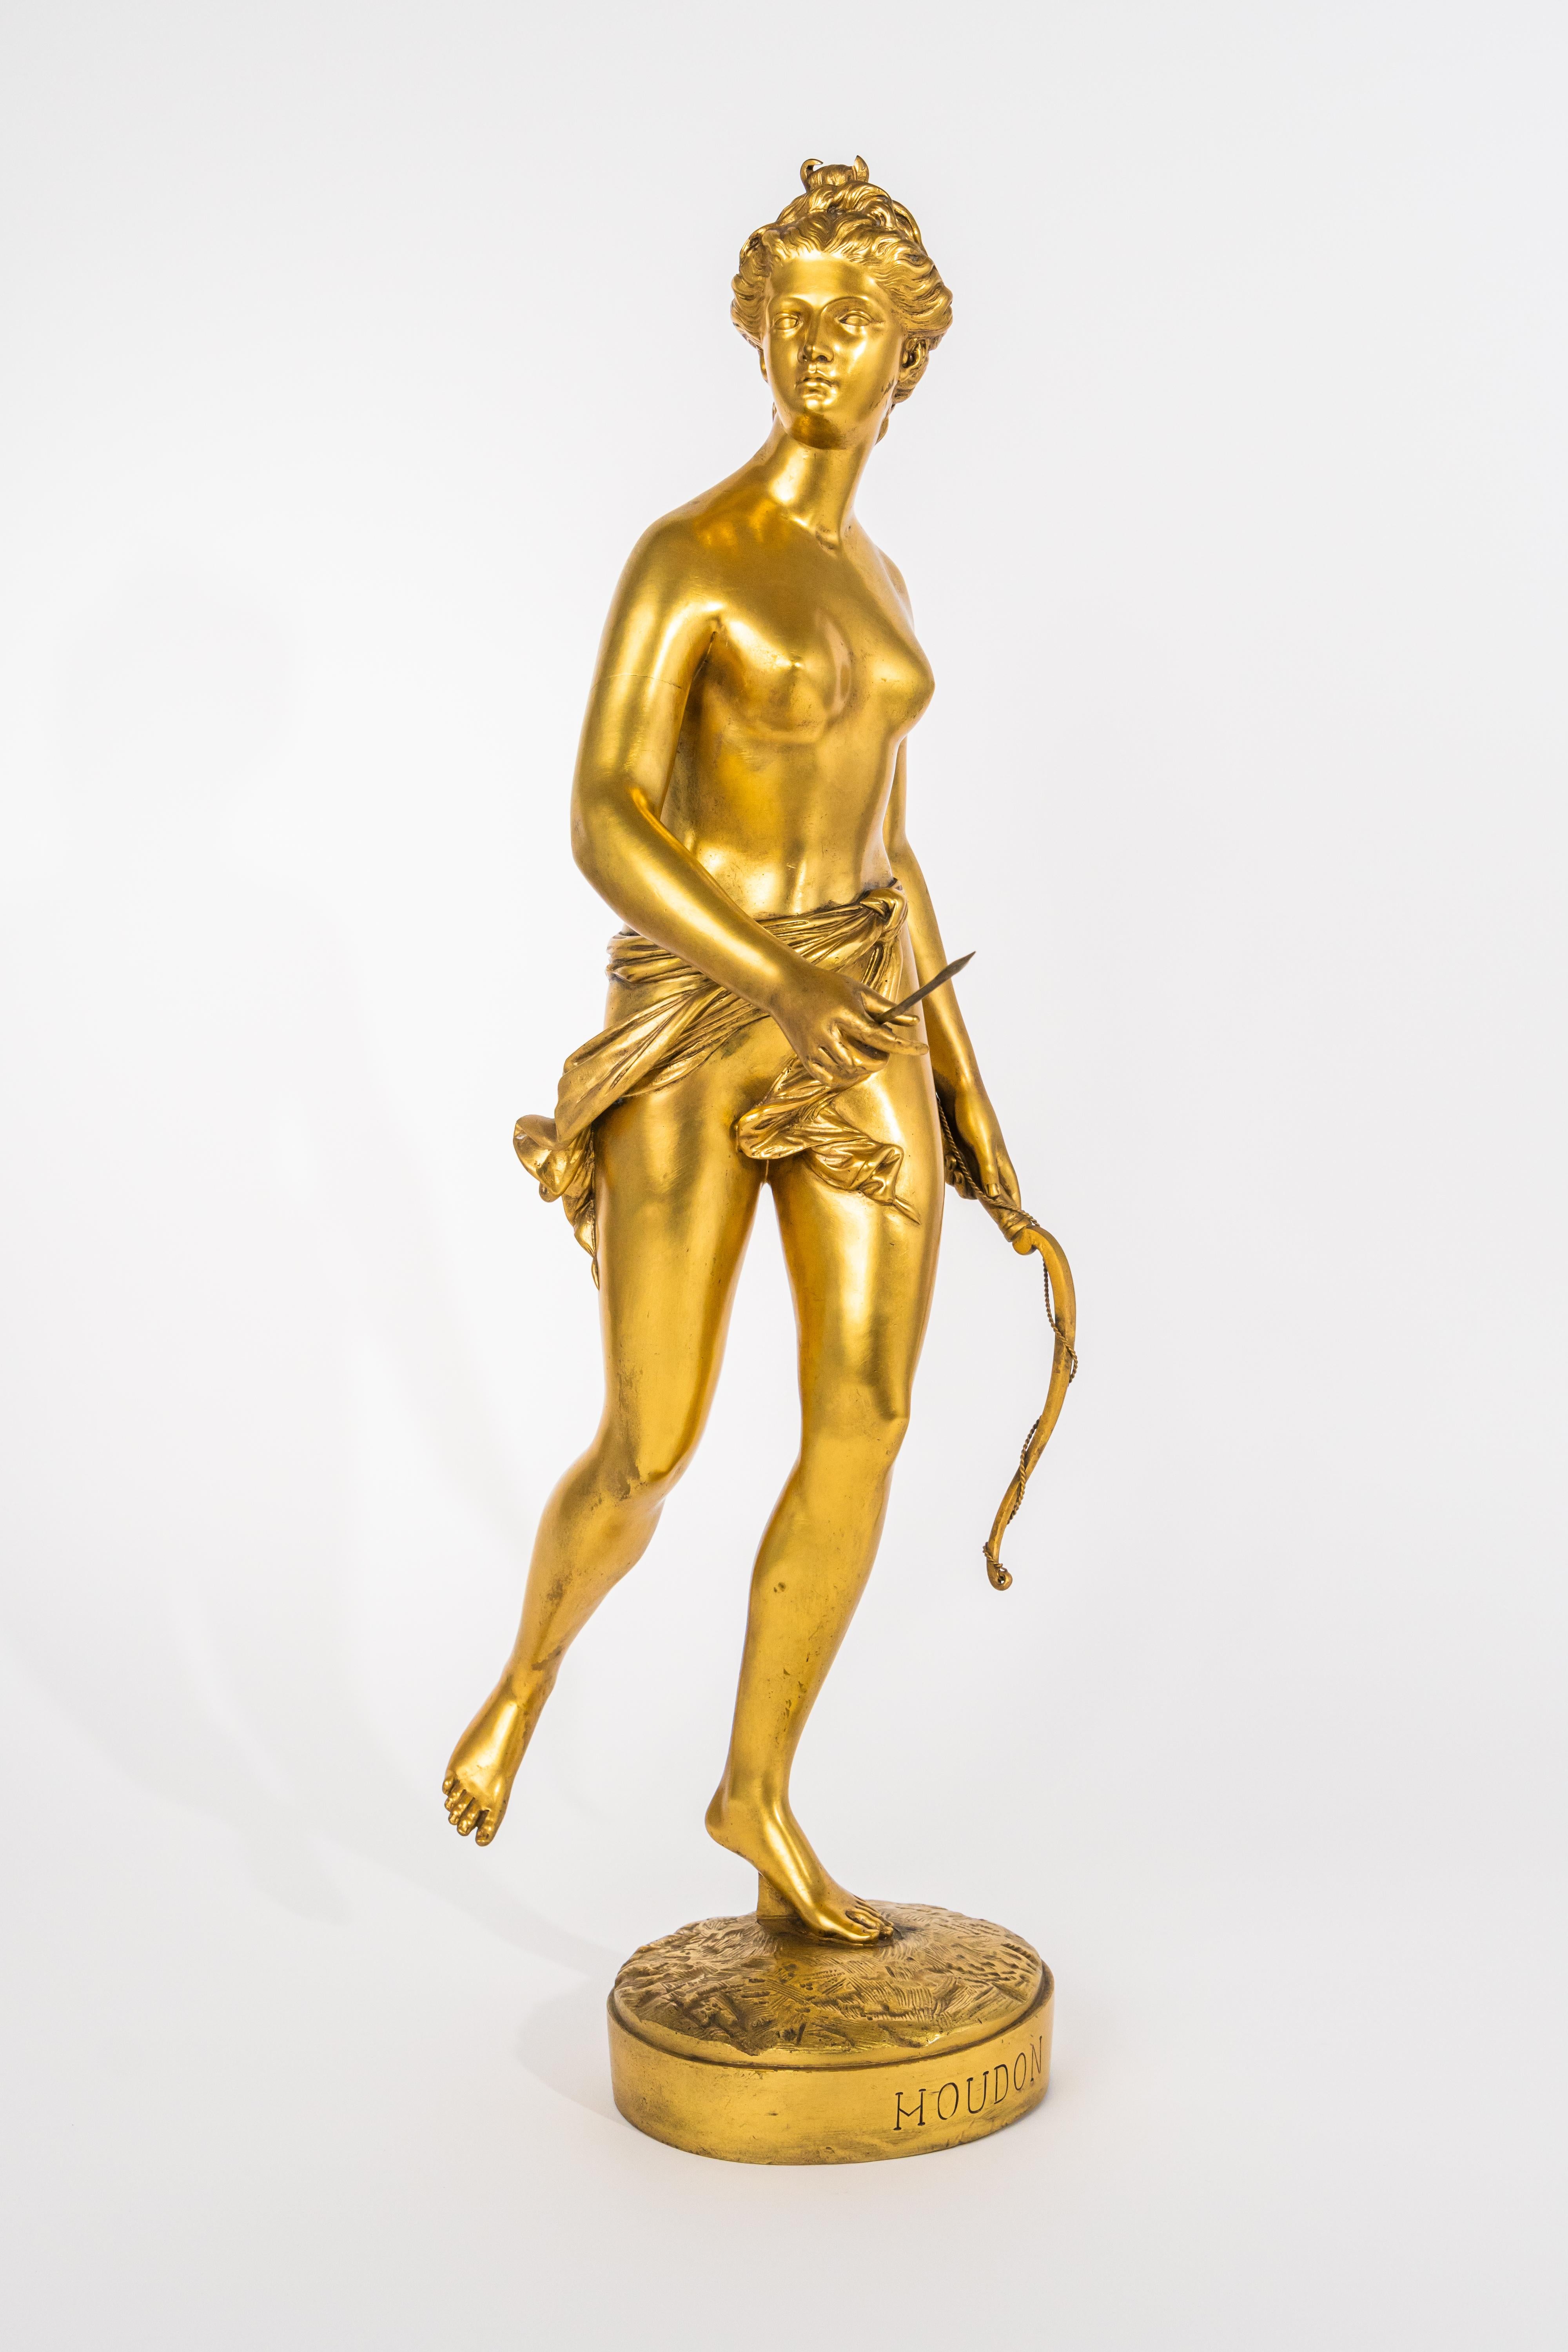 Cast 19th Century French Gilt Bronze Sculpture of Diana the Huntress